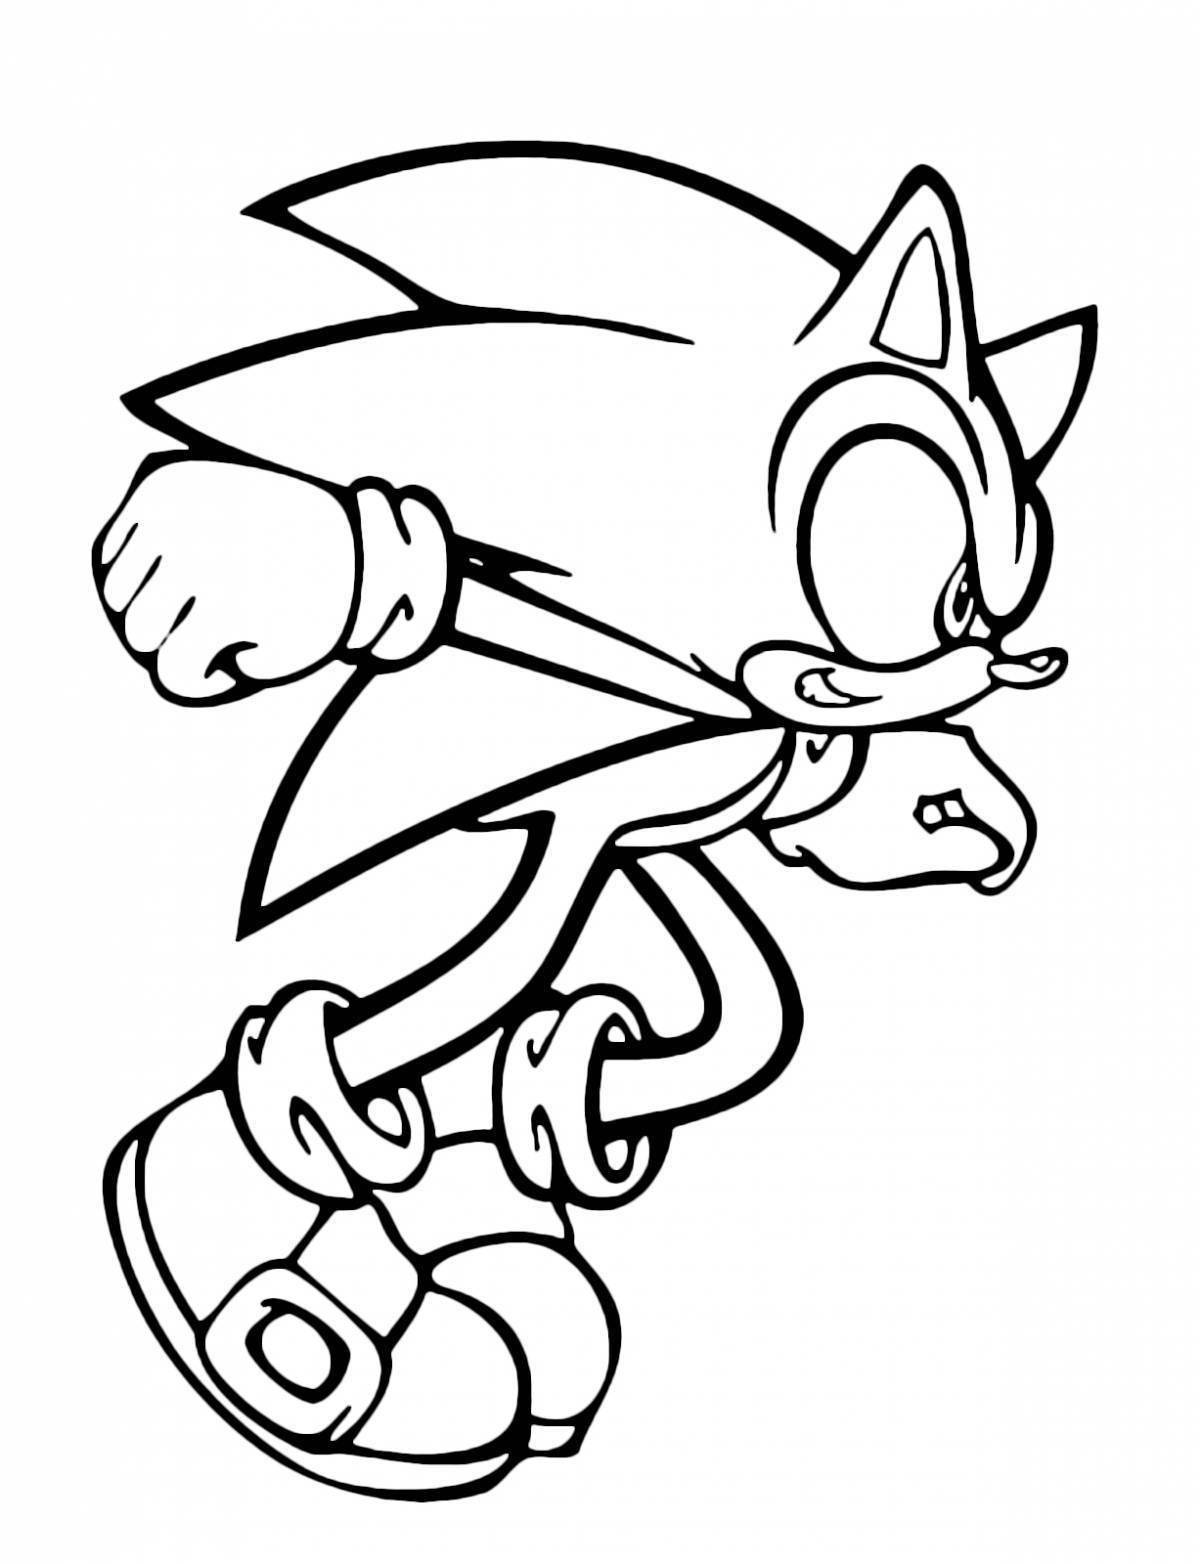 Sonic egze awesome coloring book